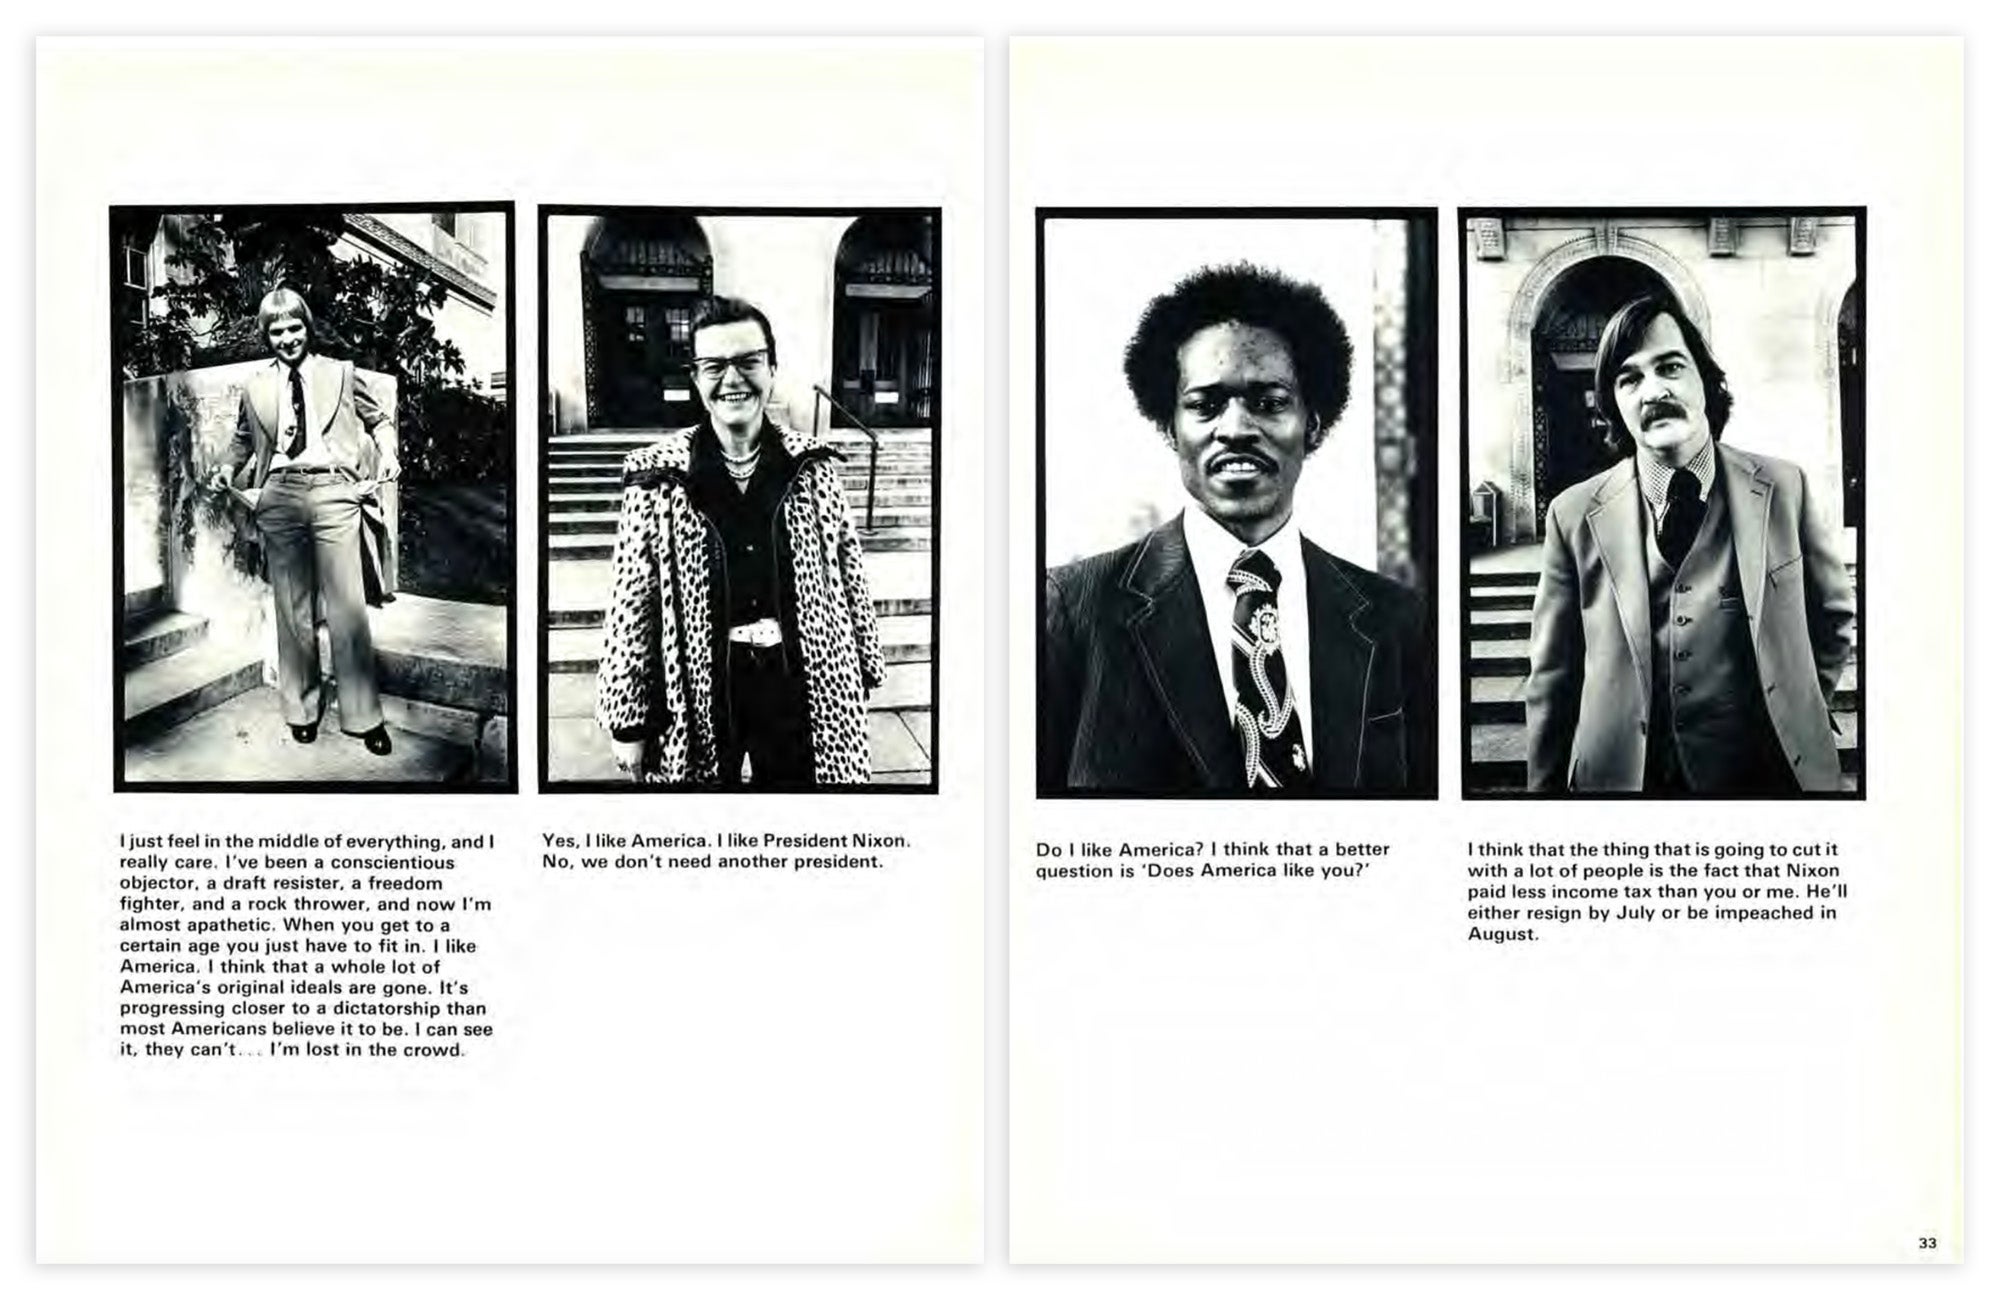 Two yearbook pages that include four photographs of people on the street responding to questions from an interviewer.